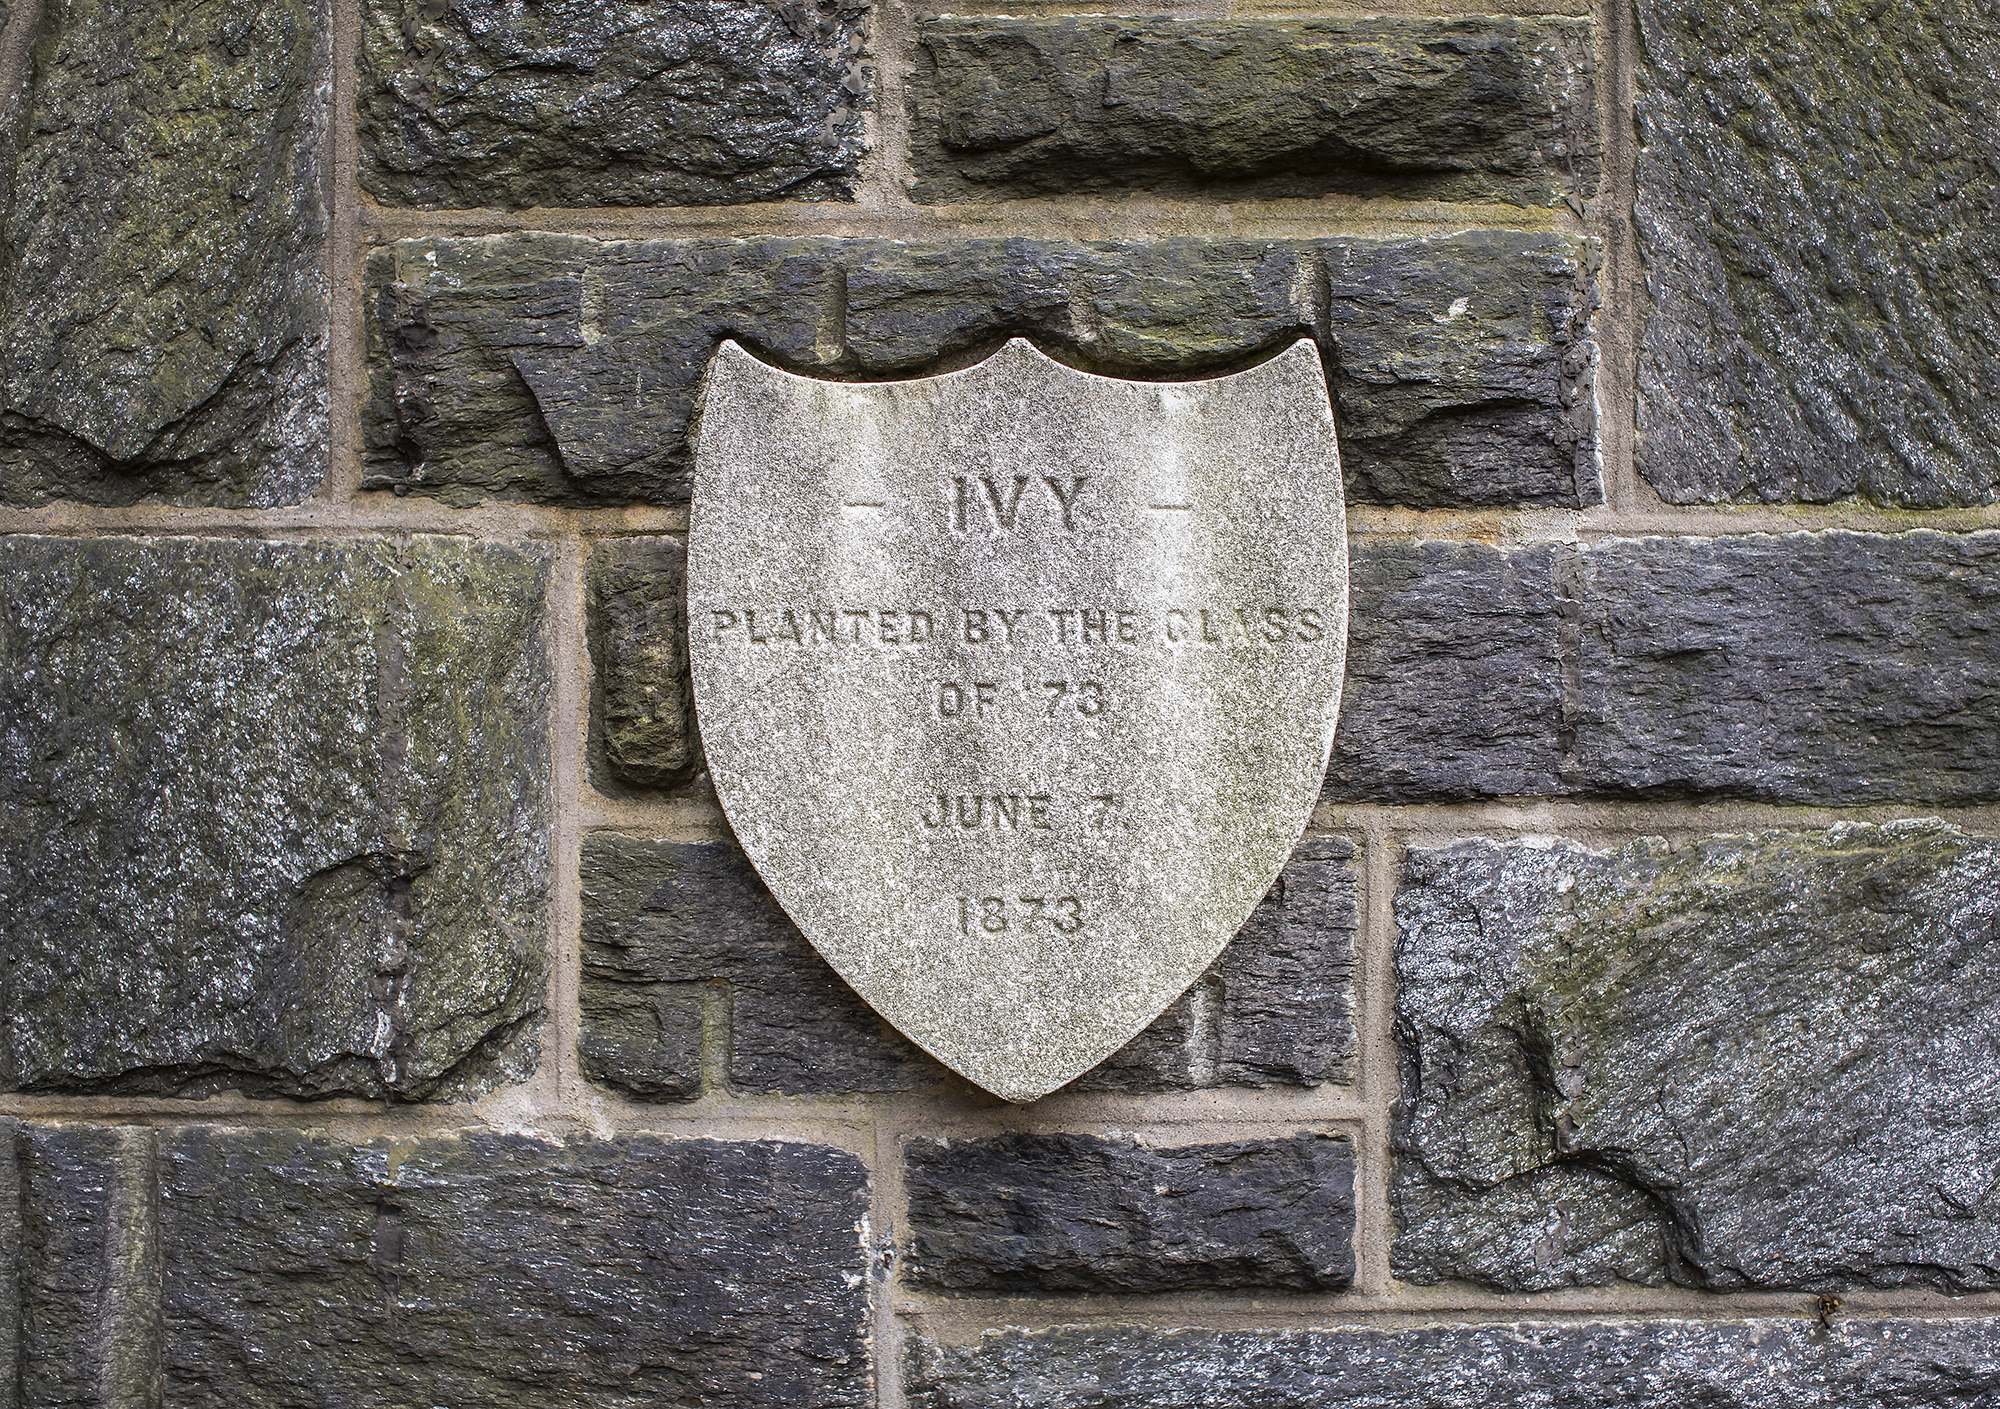 The original Ivy Stone from 1873 and in the shape of a shield is seen on Penn's College Hall.